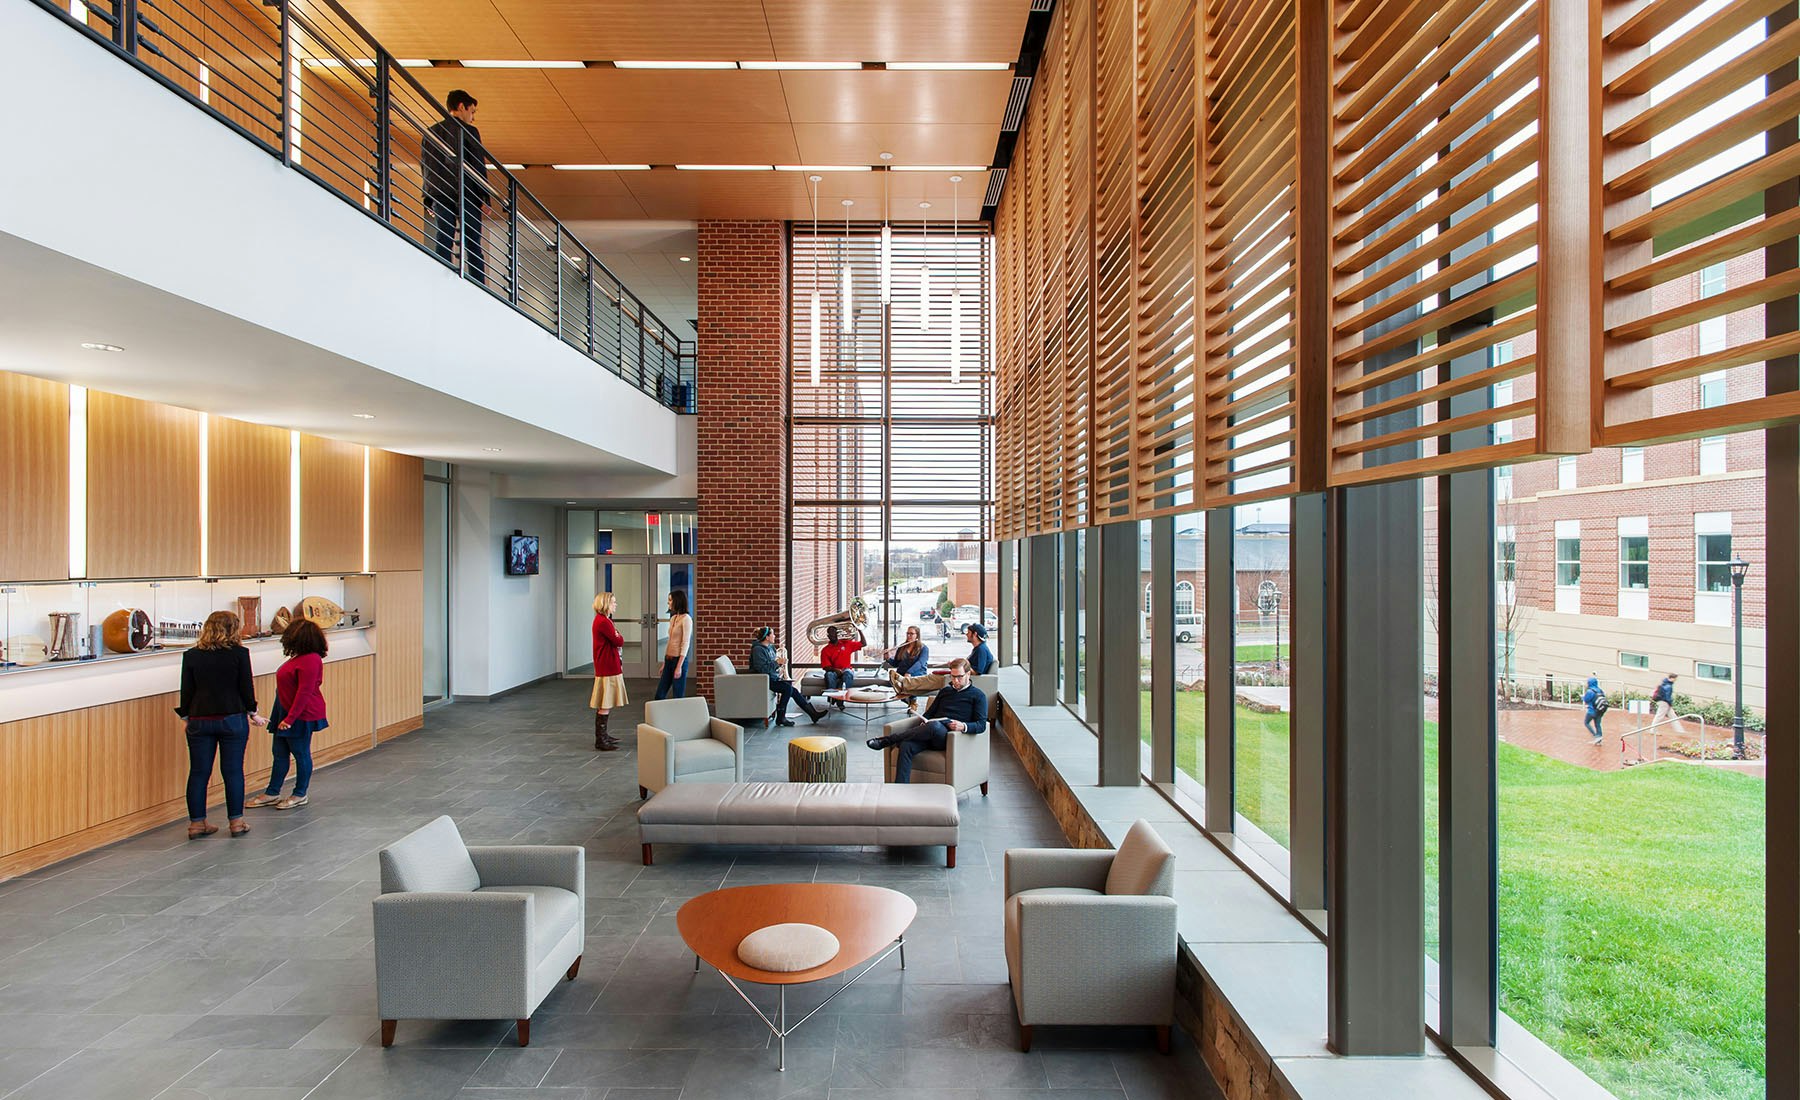 A generous multi-level promenade stitches together the main building’s public spaces and academic programs.